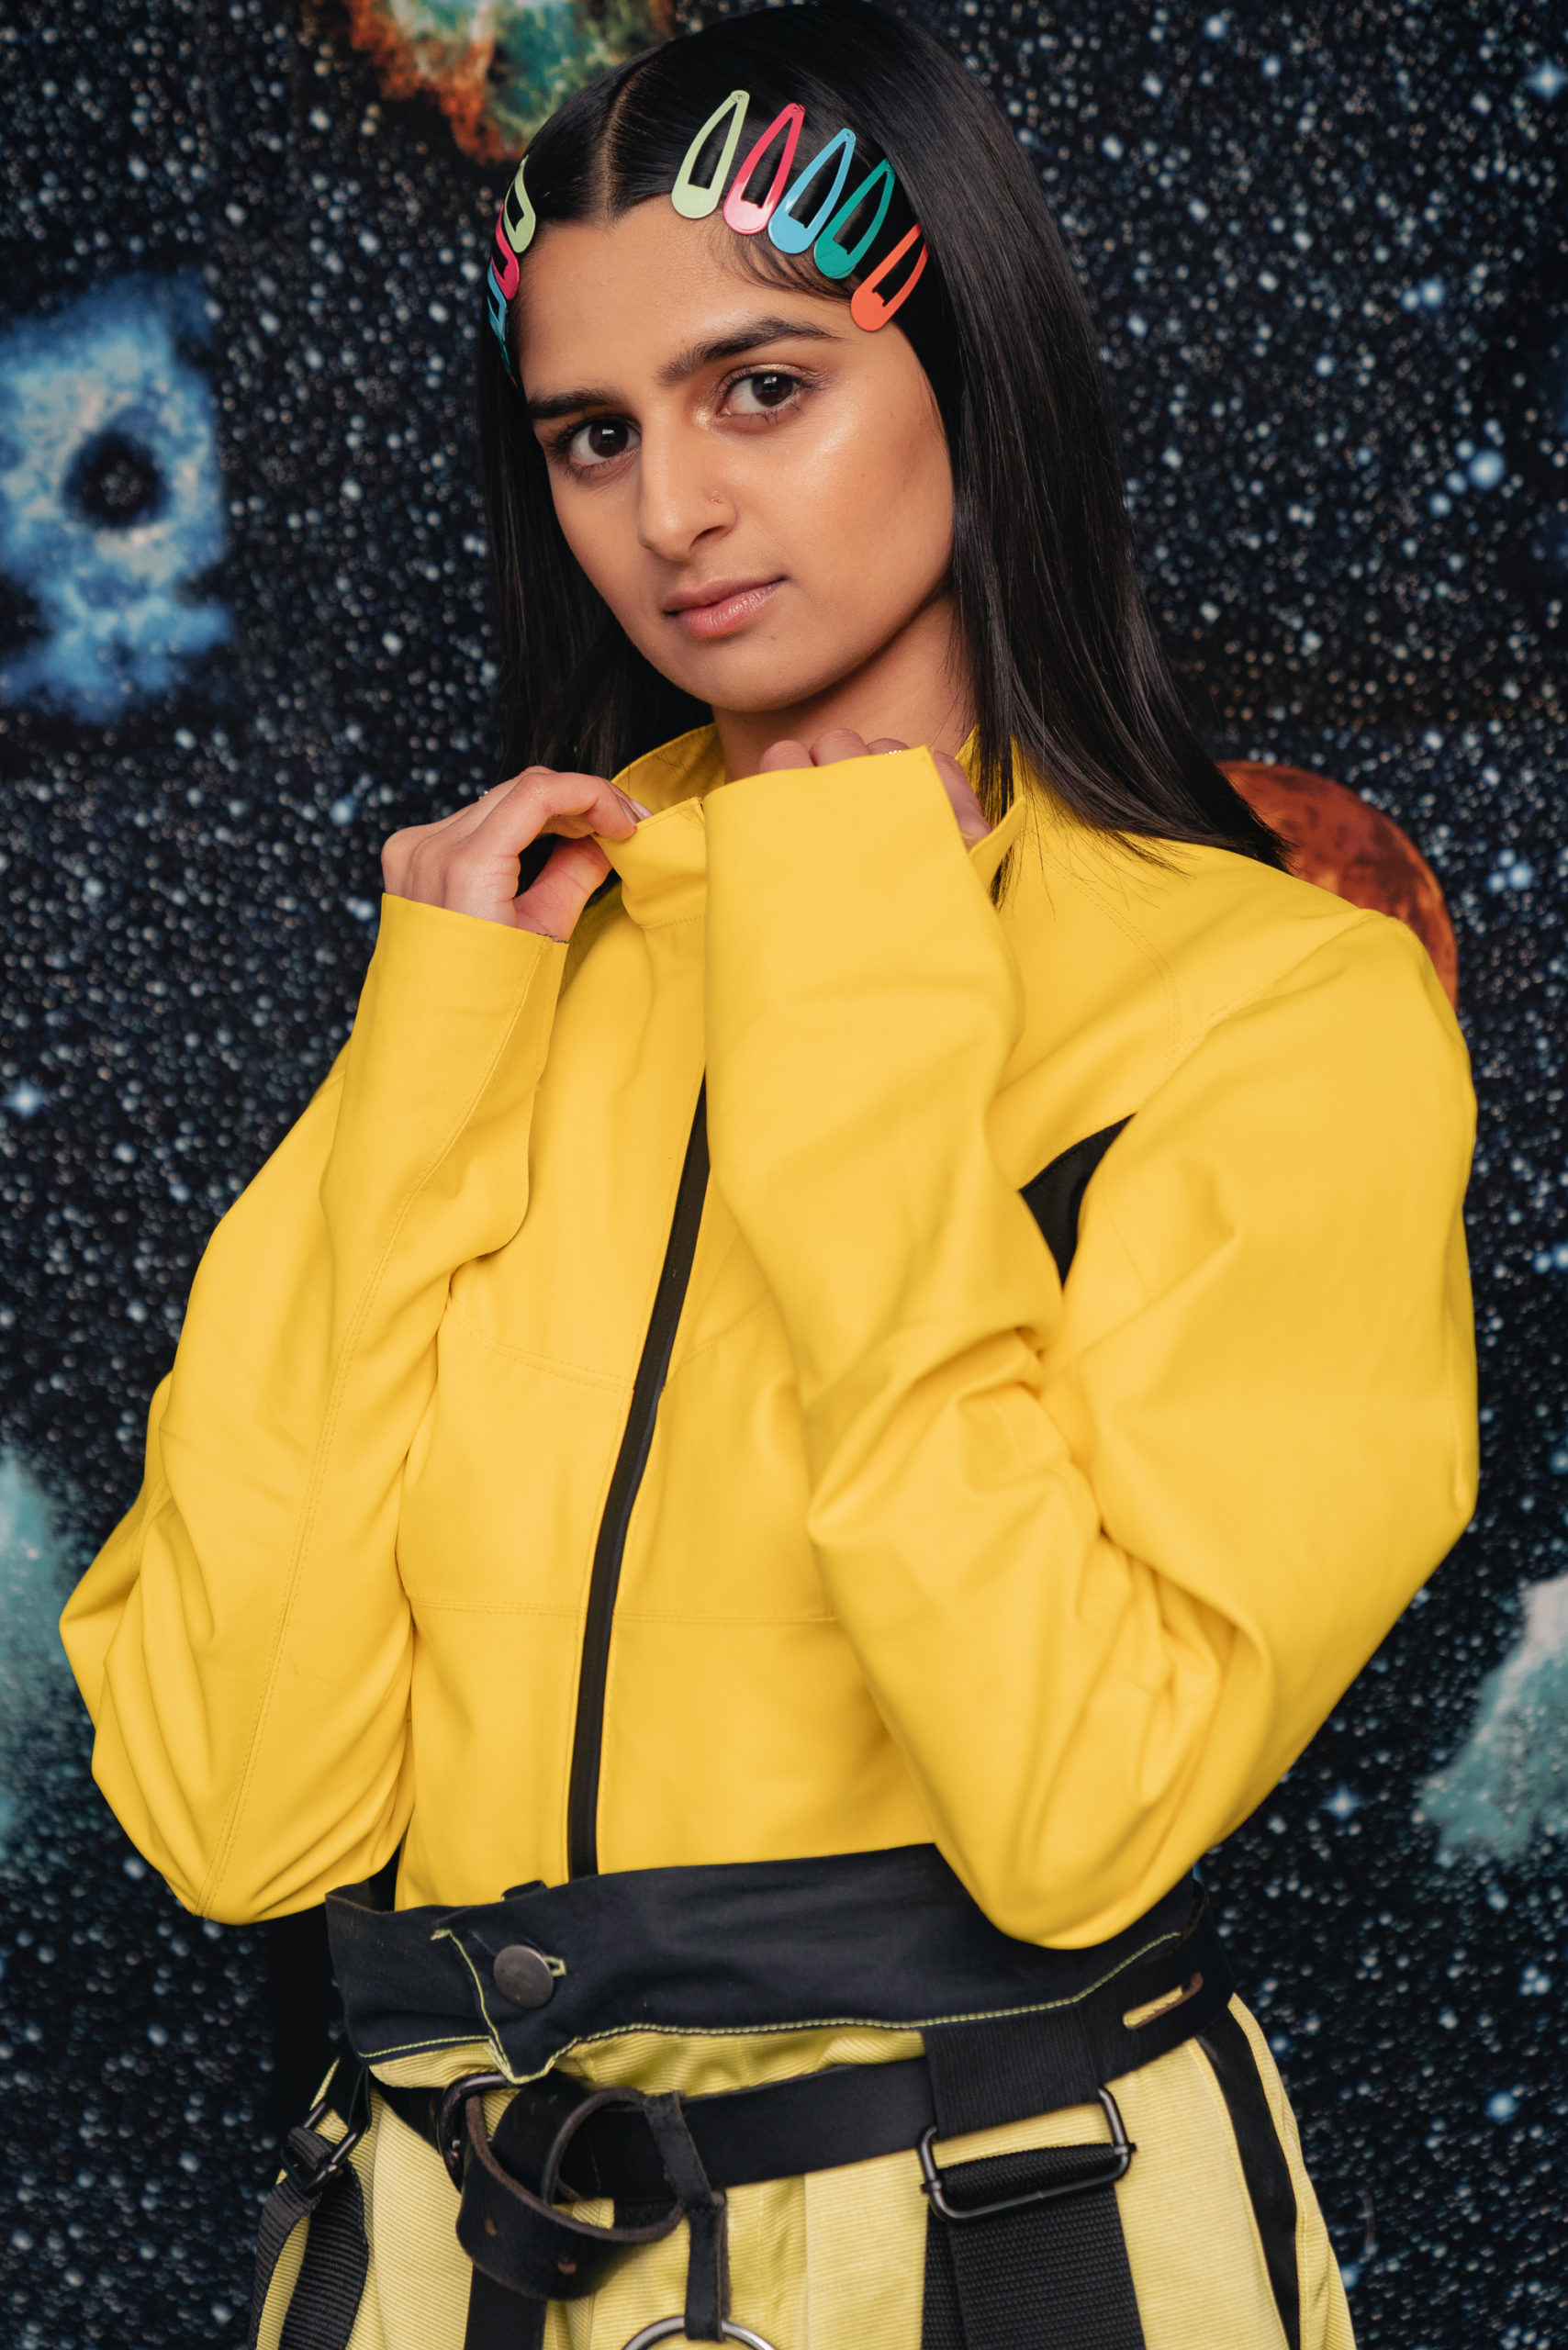 Pooja Popat [@poojapopatx] is taking up space and creating change with it.